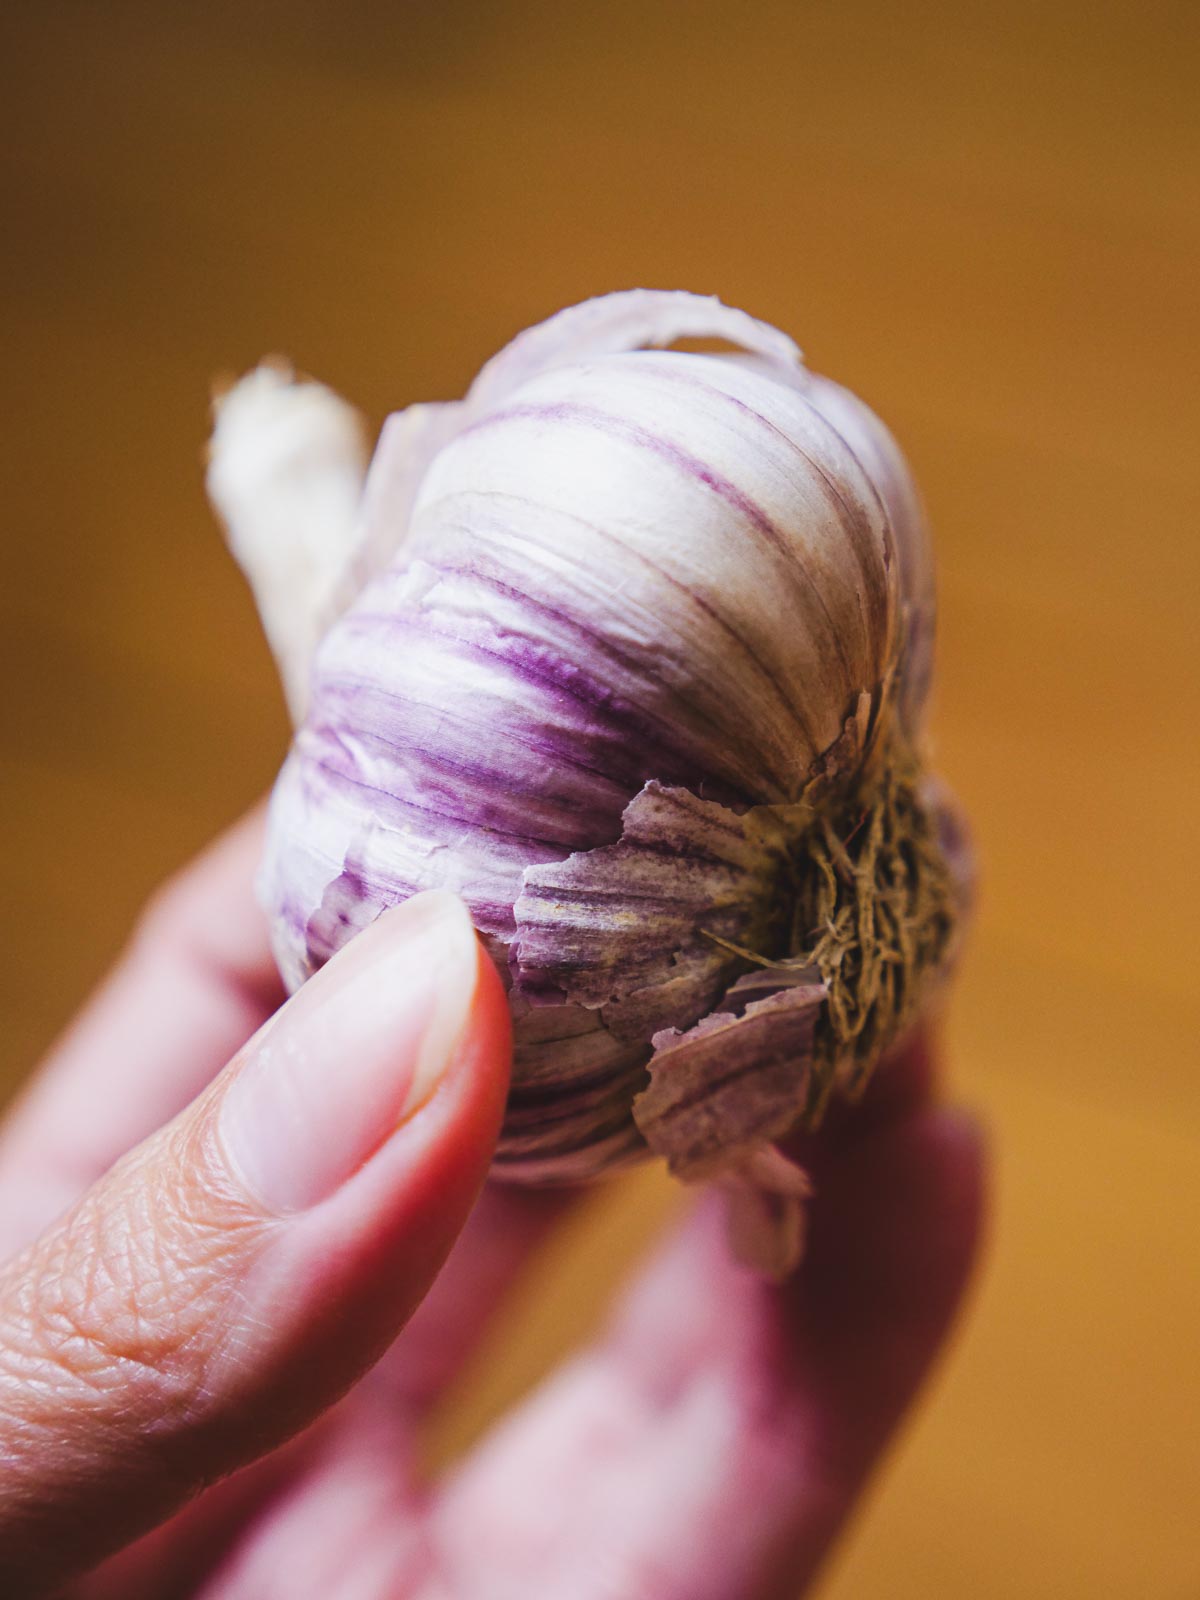 A hand holding white and purple streaked Russian red hardneck garlic.